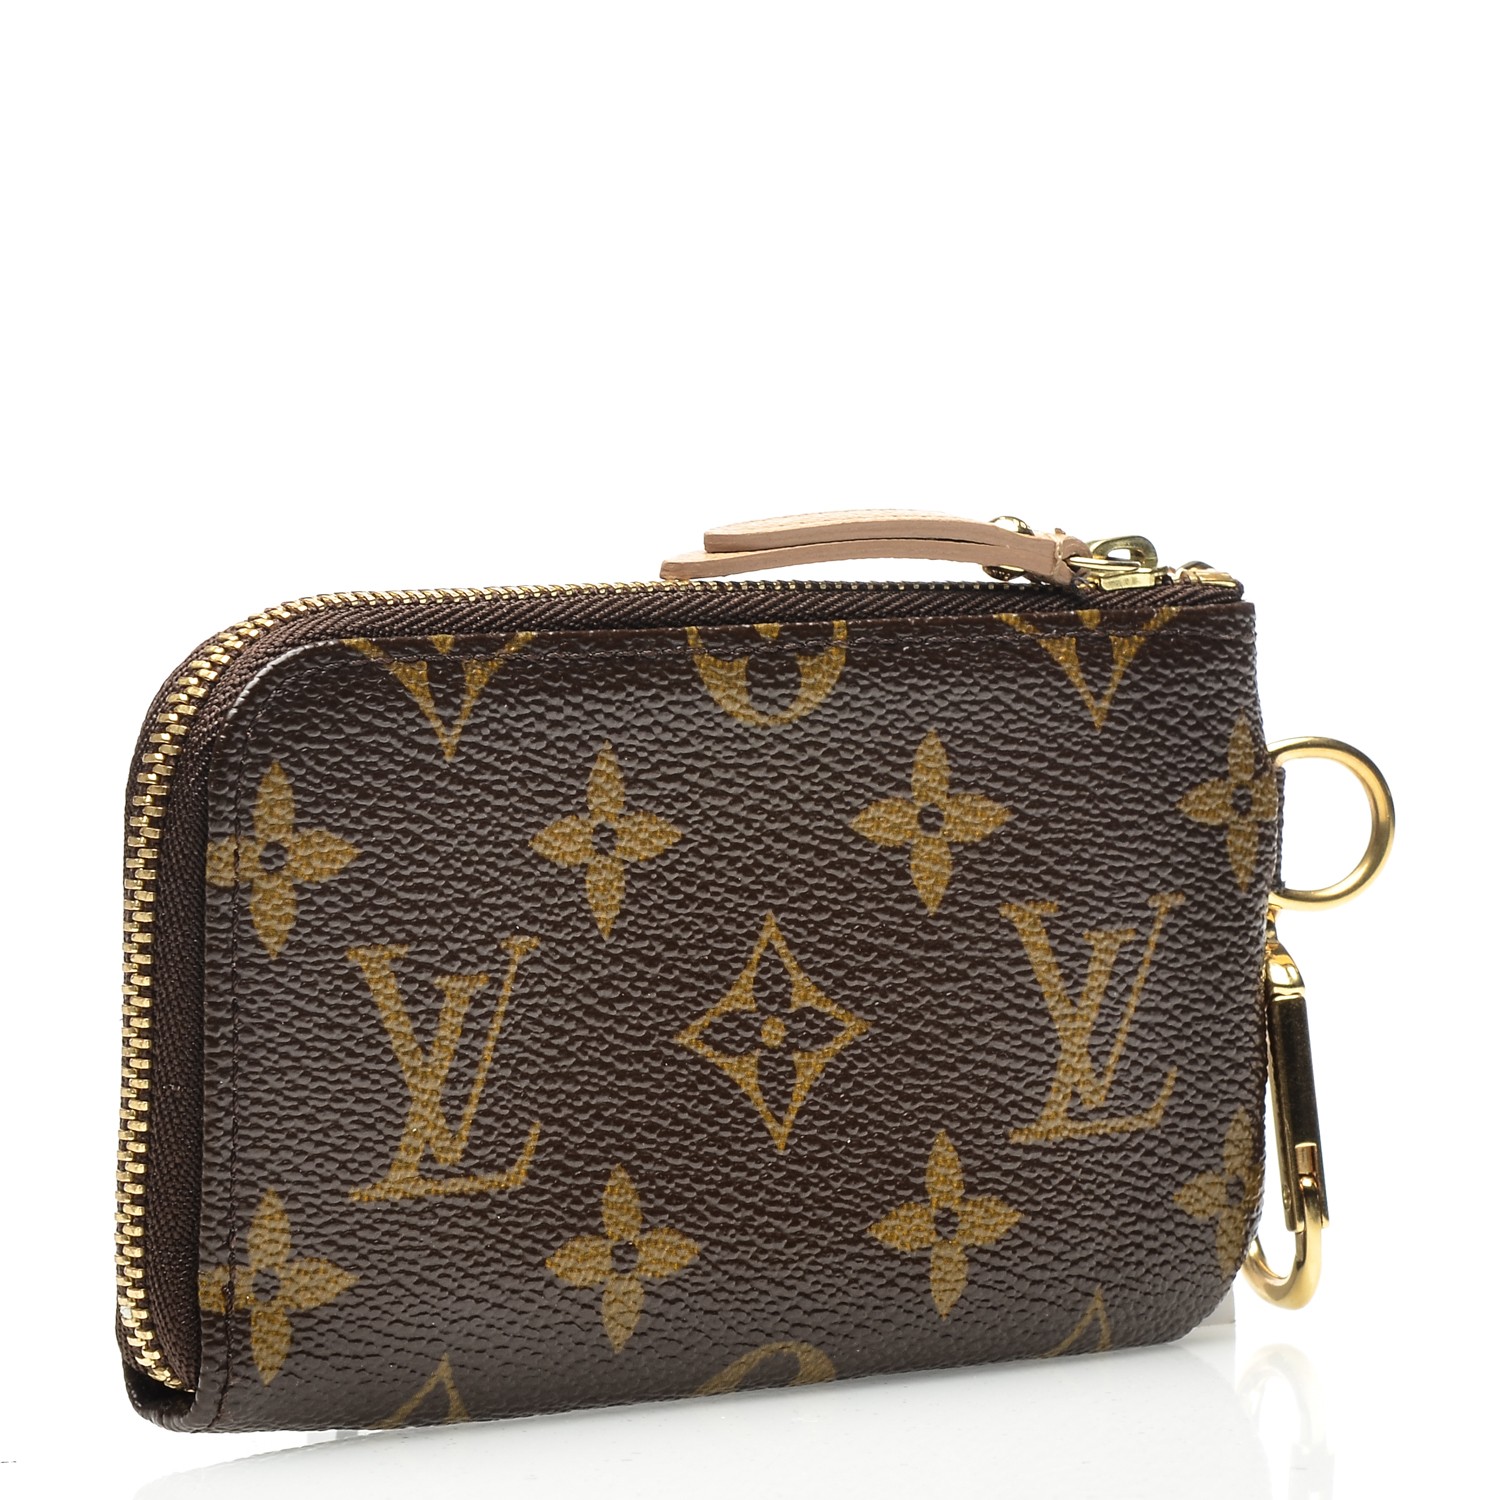 LOUIS VUITTON Monogram Complice Trunks and Bags Key Pouch 190970